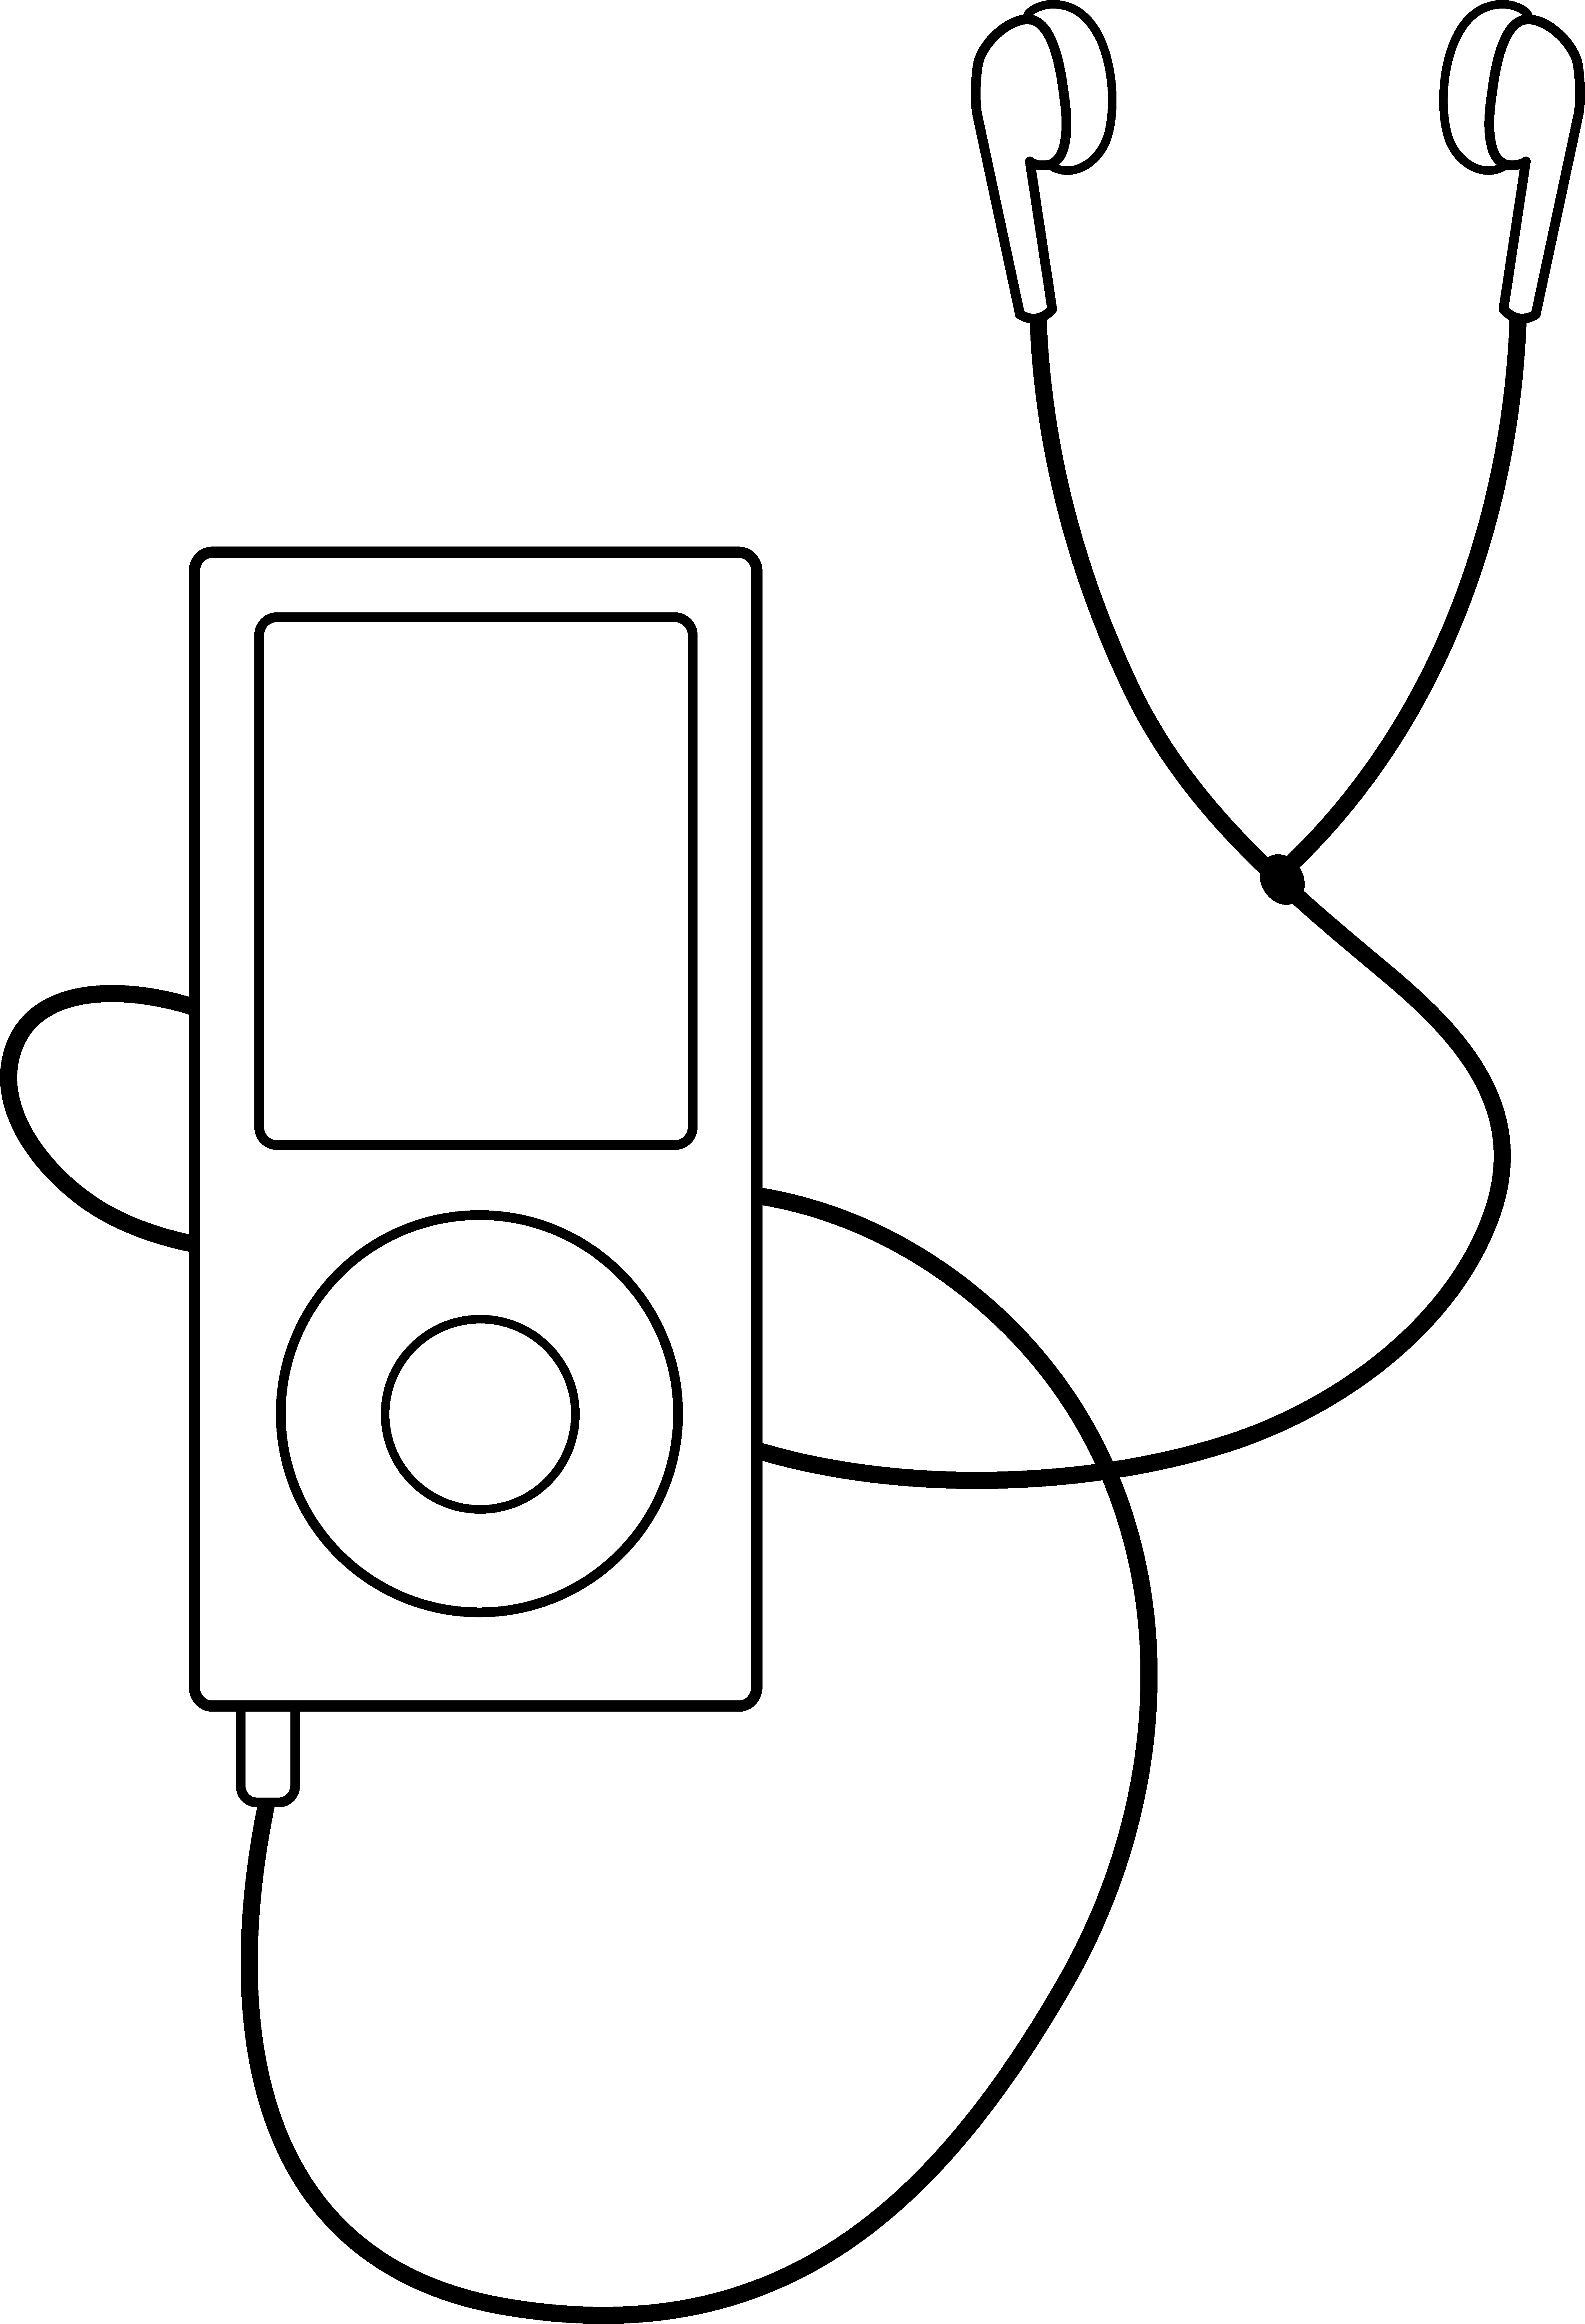  collection of ipod. Clipart ear coloring